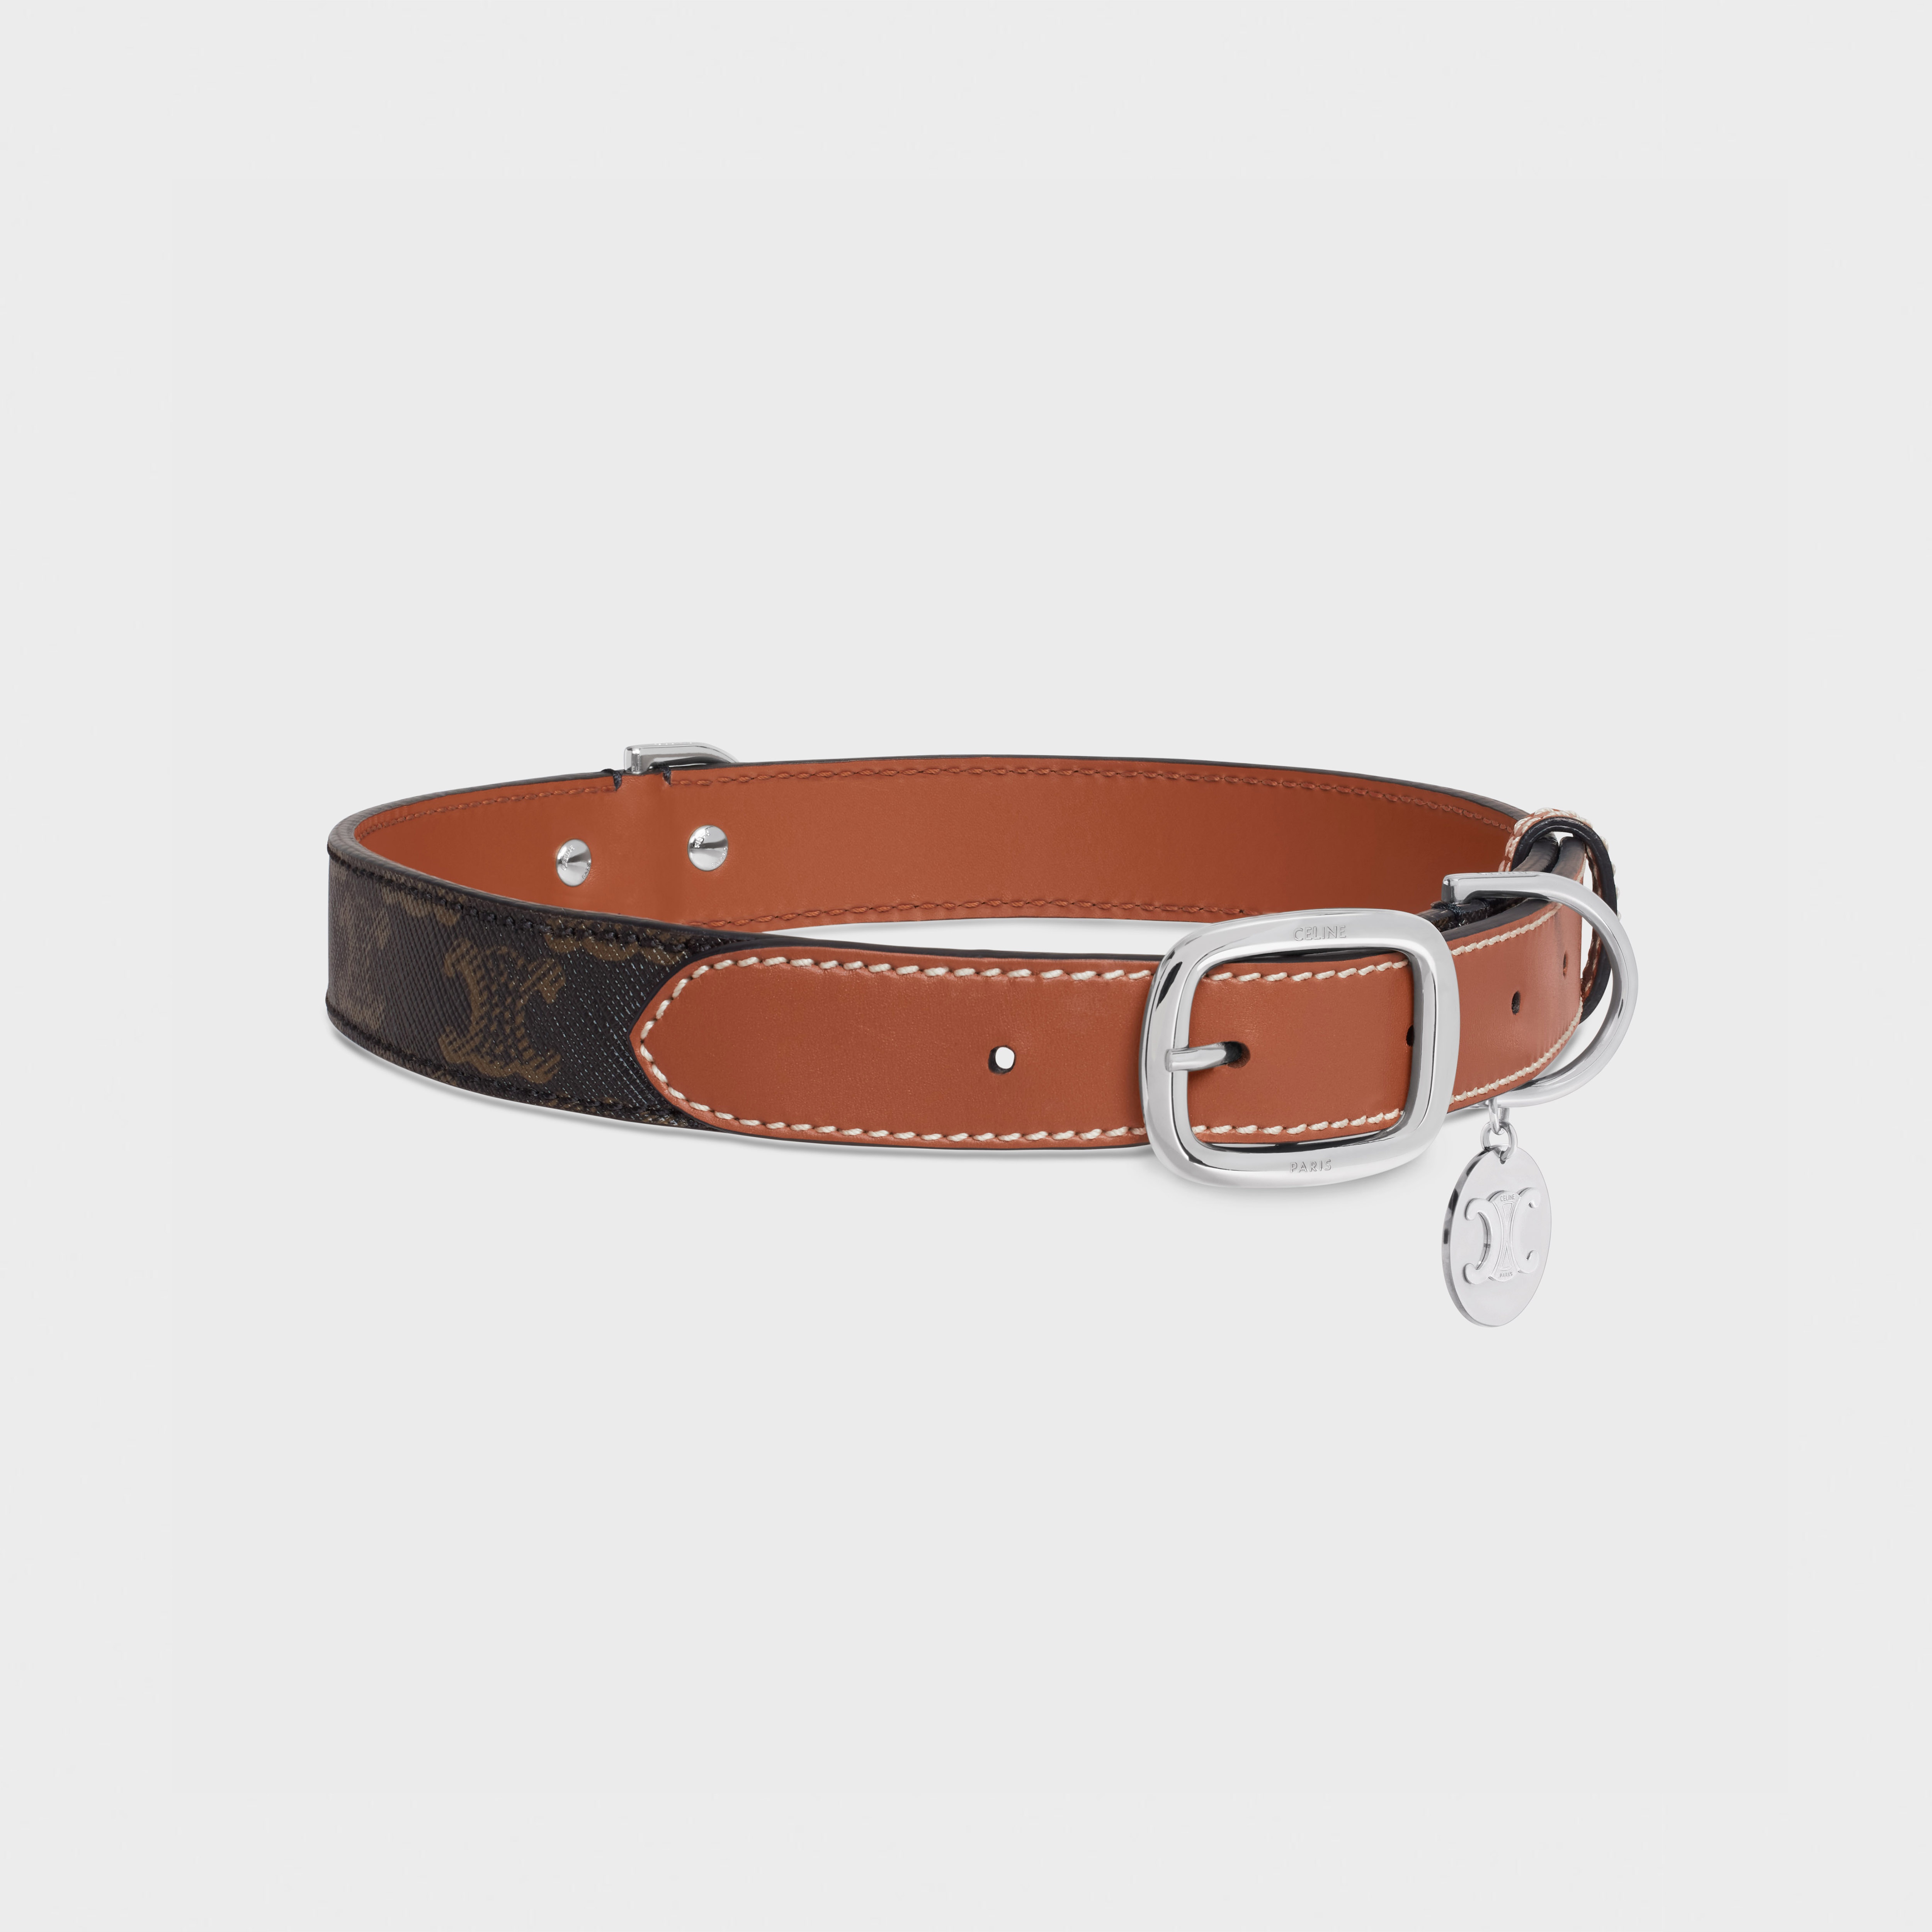 Celine - Wide Large Dog Collar in Triomphe Canvas and Calfskin Leather - Beige / Black / Brown - for Women